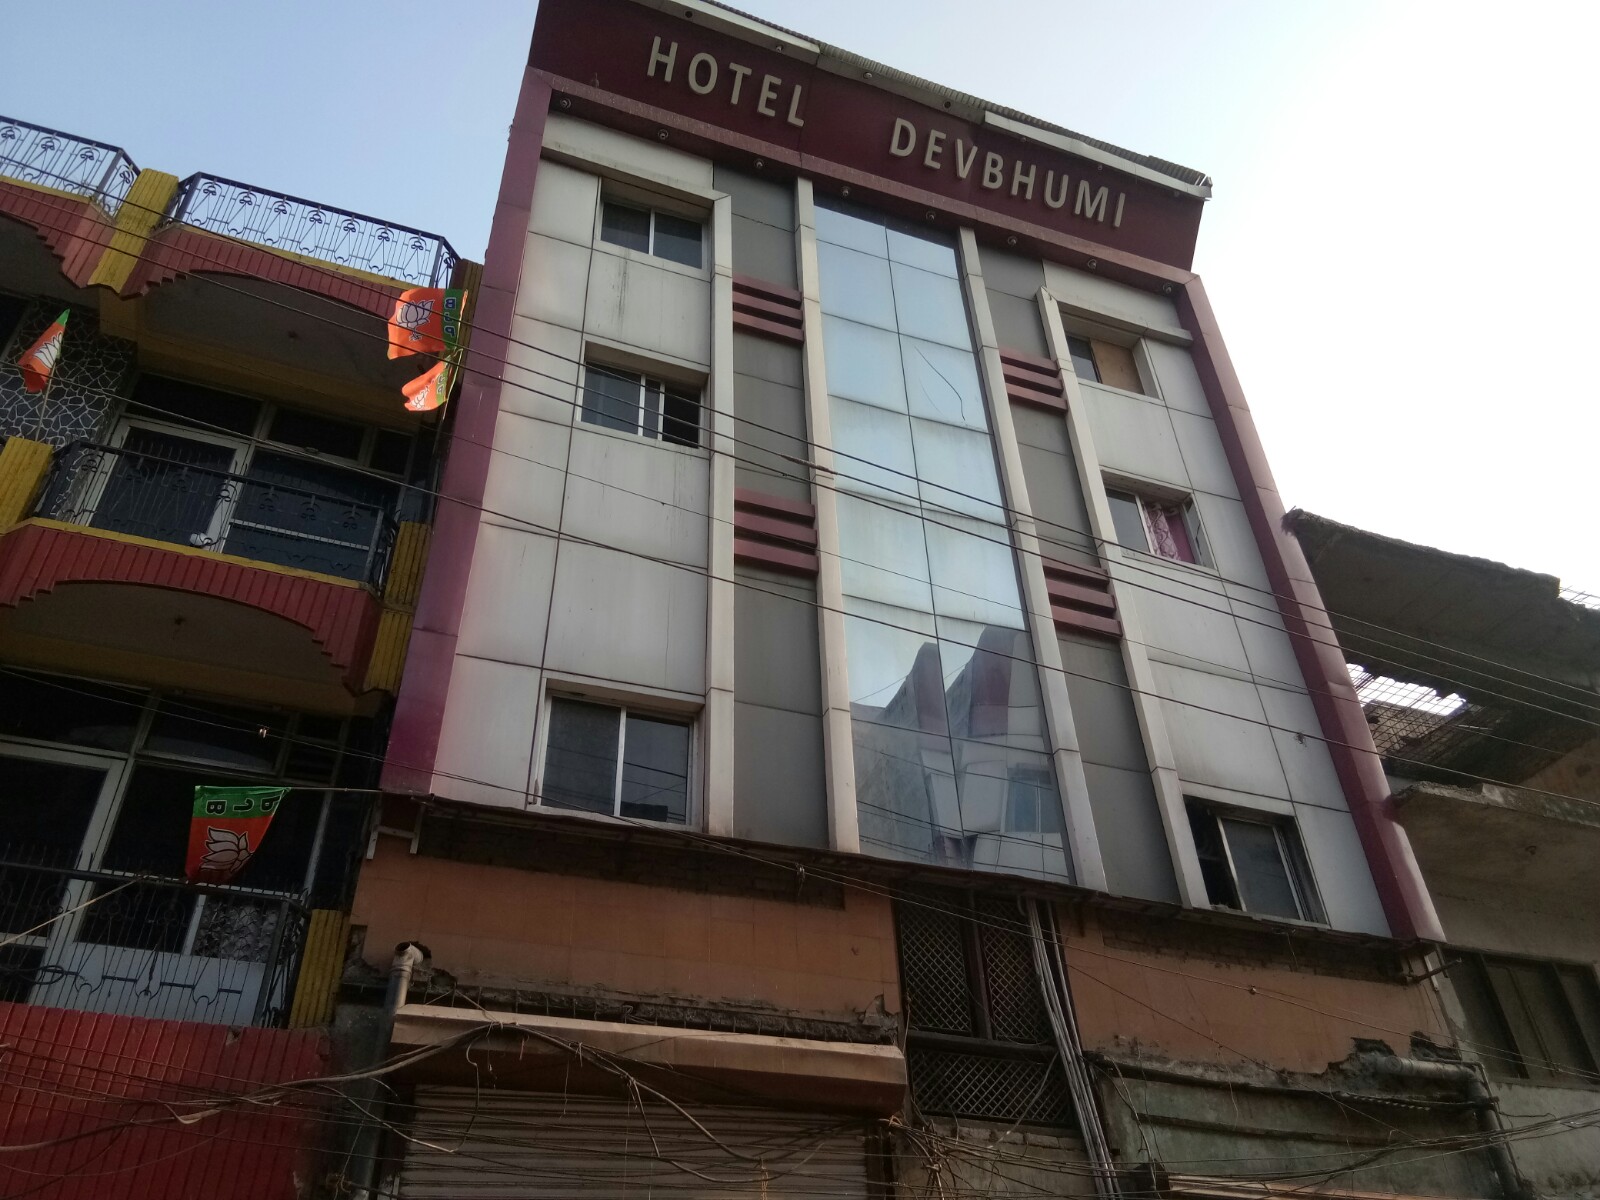 Hotel Dev Bhumi - Commercial Building , HD Wallpaper & Backgrounds